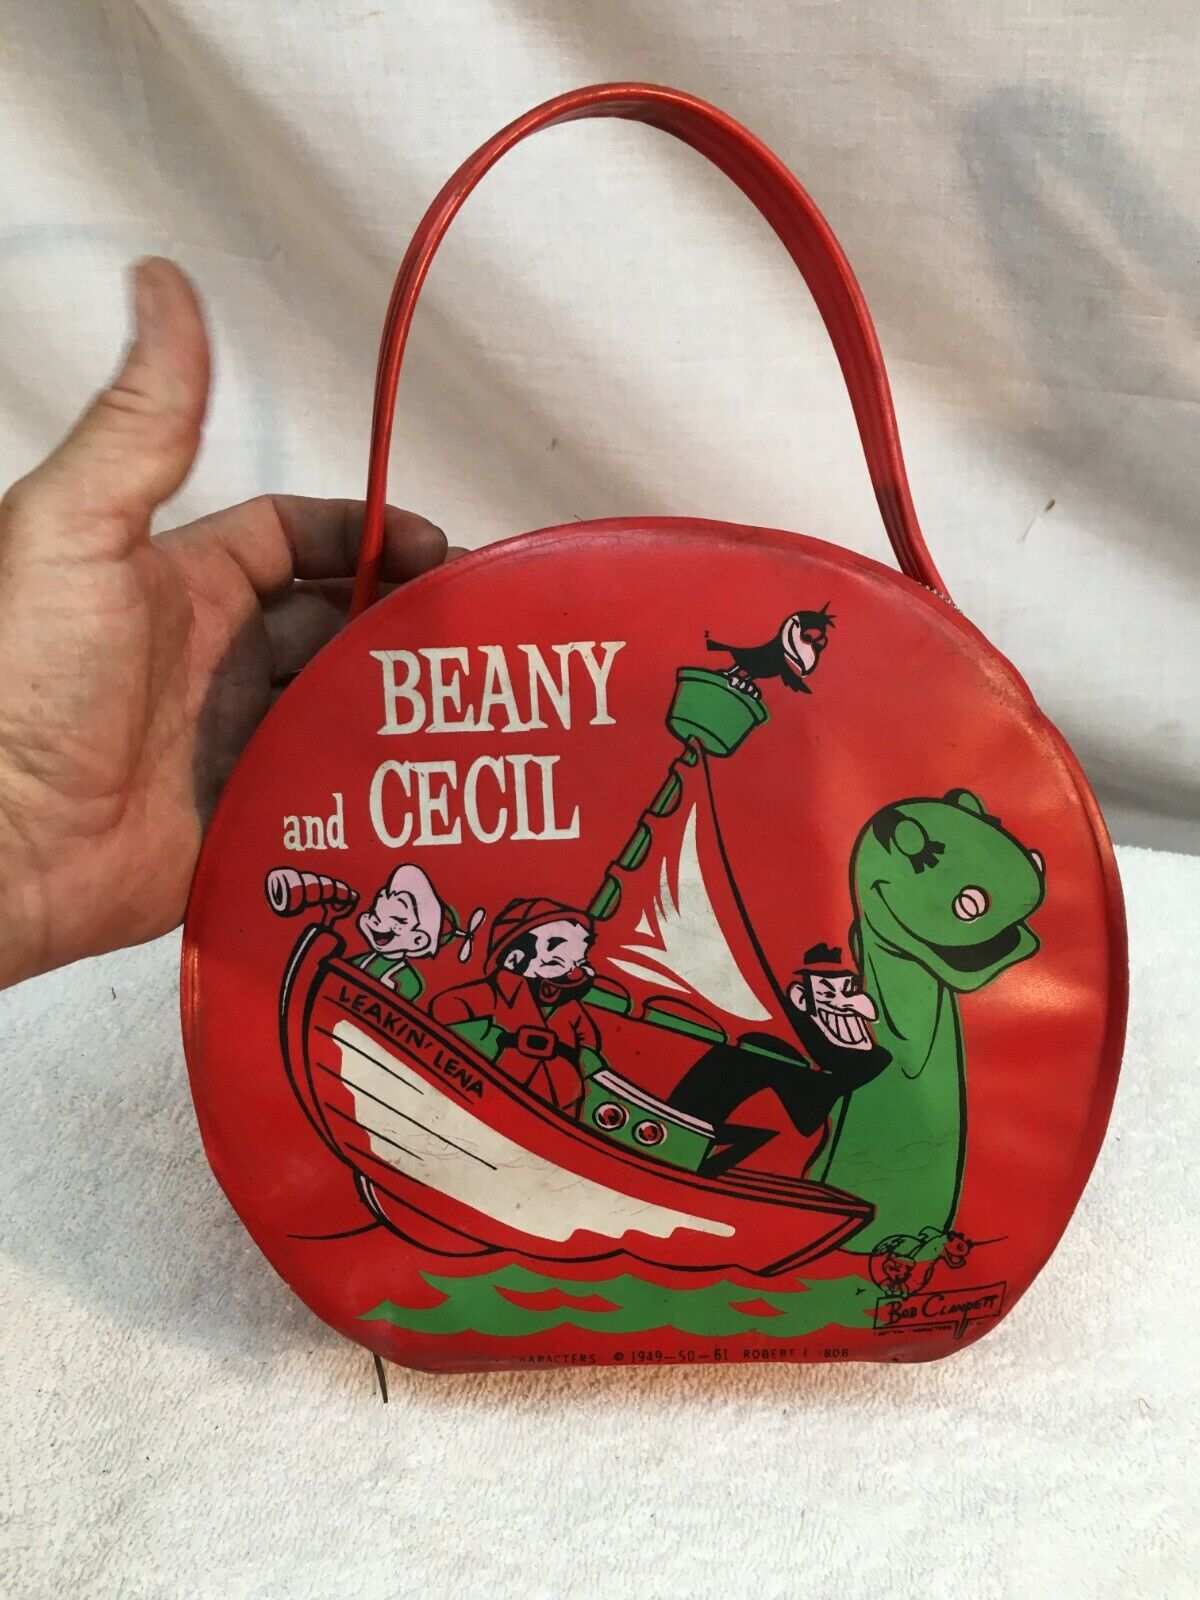 Vintage rare BEANY AND CECIL Vinyl Lunchbox Bag Purse Style 1950s